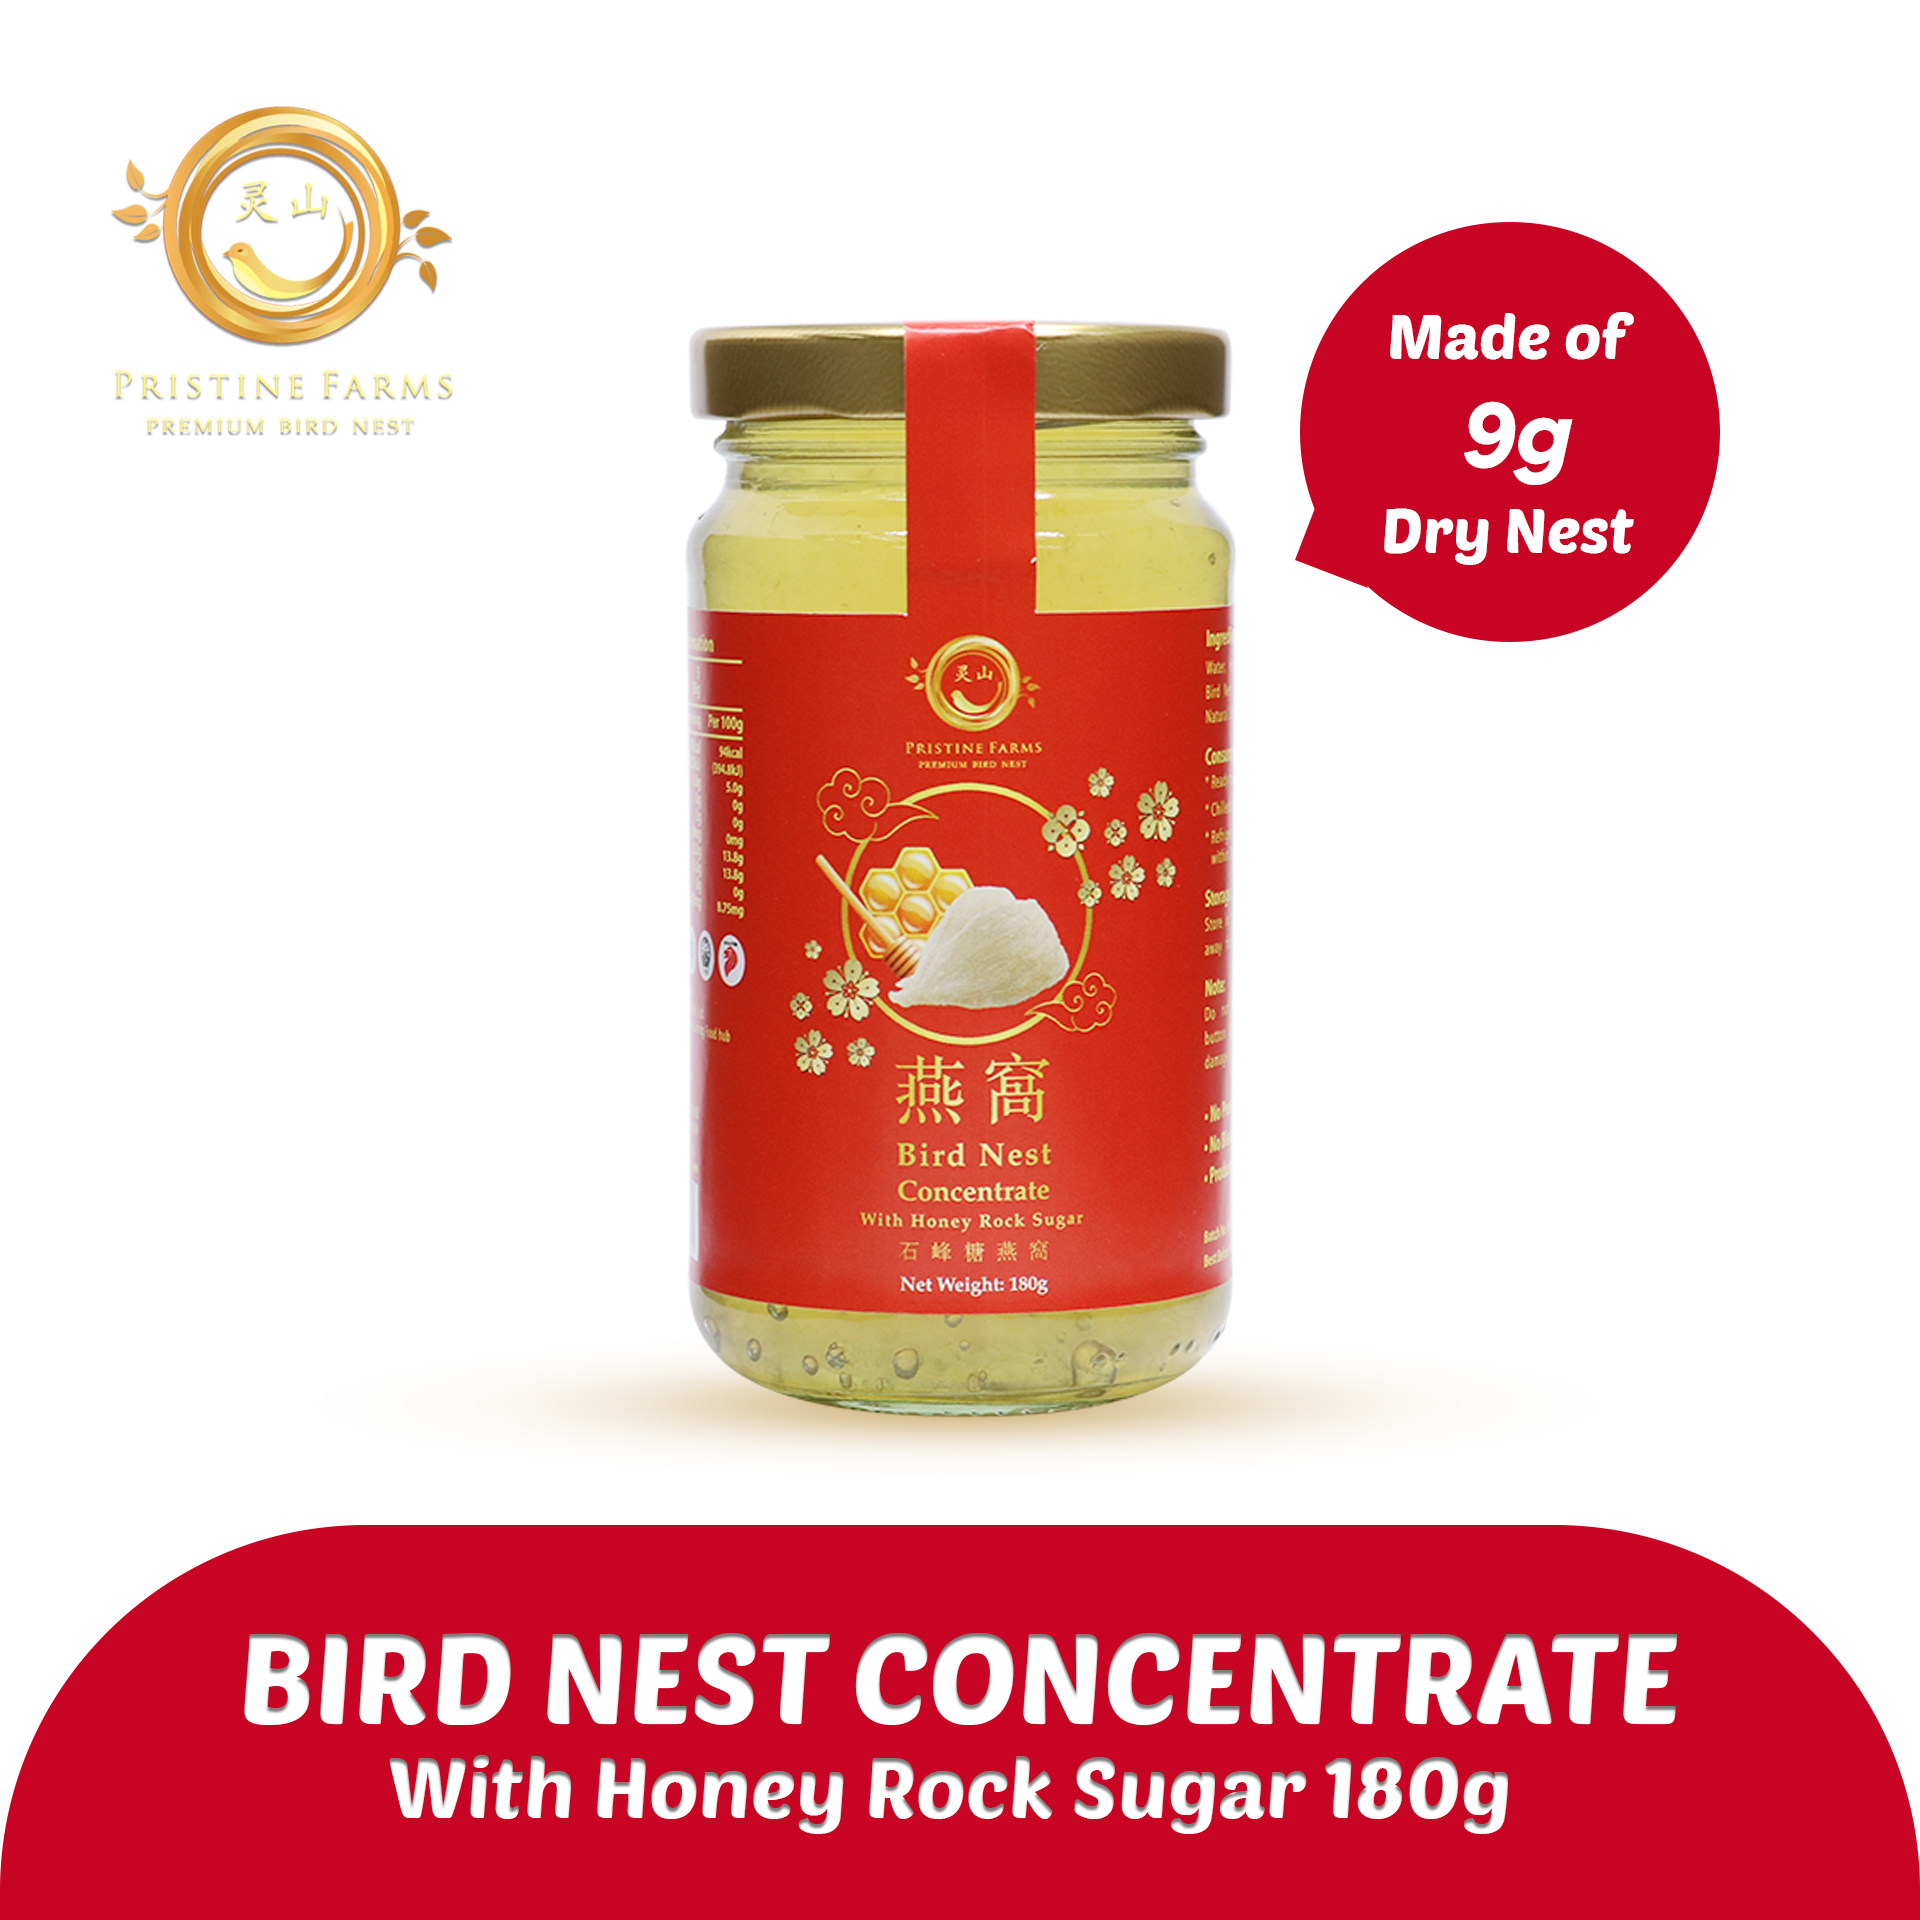 Pristine Farm Bird Nest Concentrate with Generous 9g of Dry Nest - 180g Big Bottle